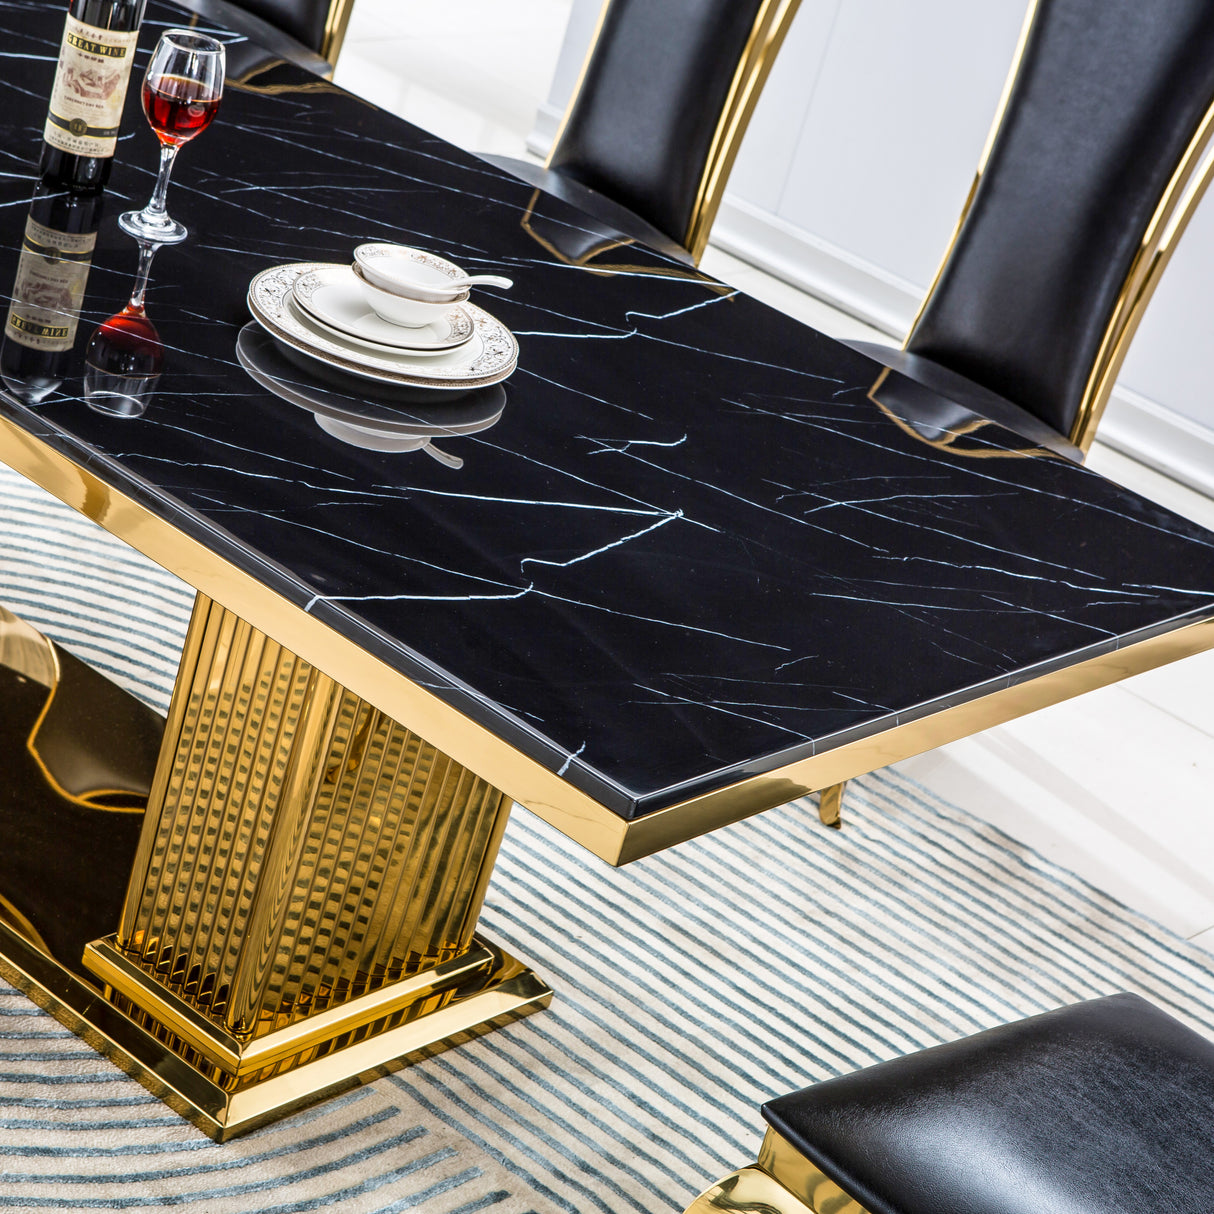 Modern Rectangular Marble Dining Table, 0.71" Thick Marble Top, Double Pedestal Pillar Stainless Steel Base with Gold Mirrored Finish(Not Including Chairs) - Home Elegance USA